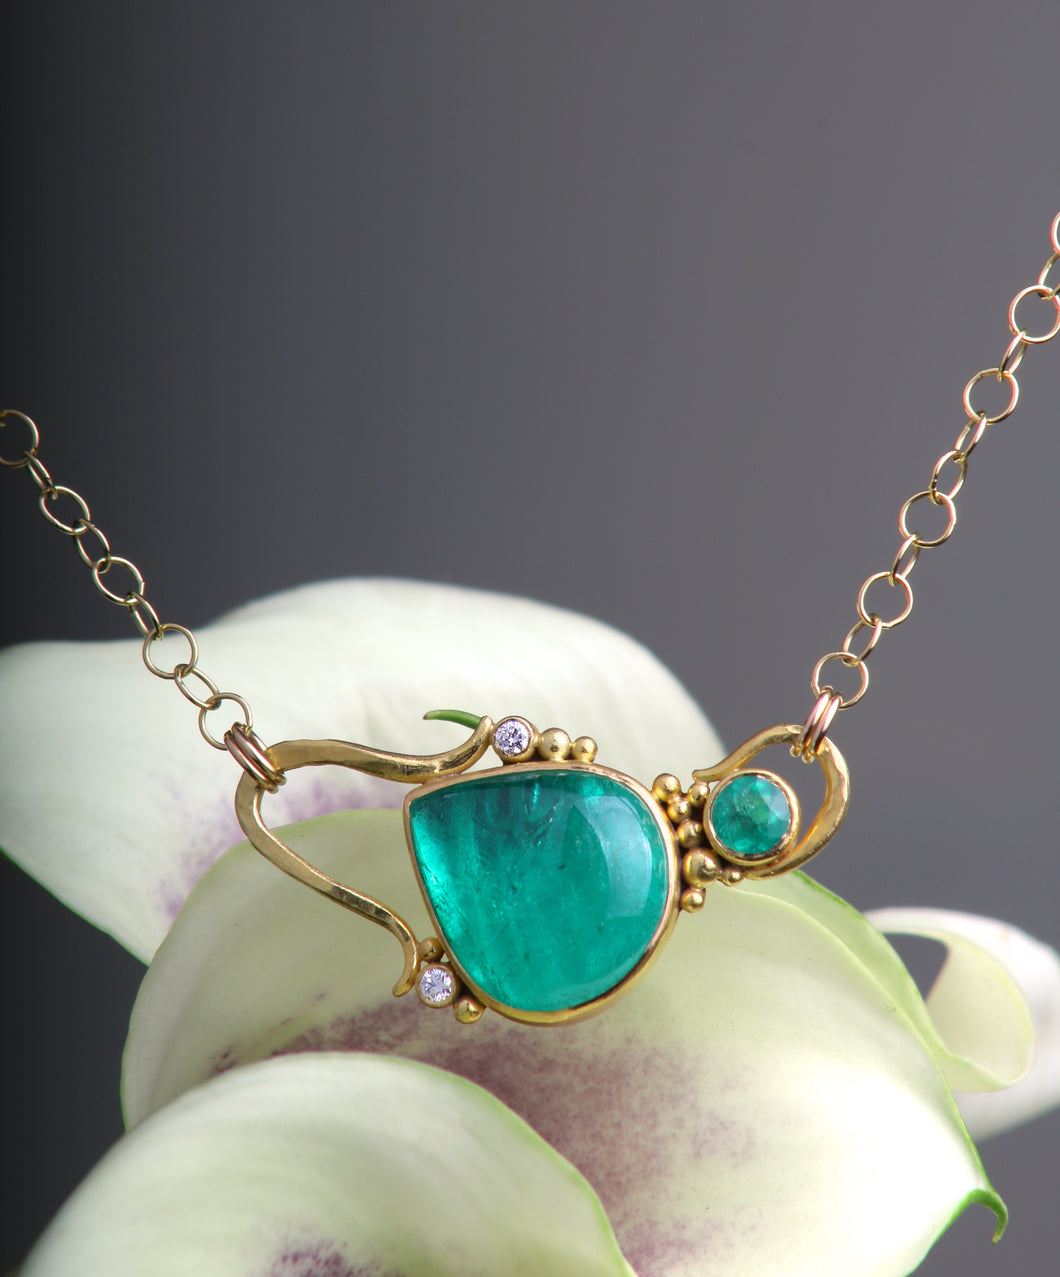 Emerald Cabochon Necklace (08490) - Ormachea Jewelry